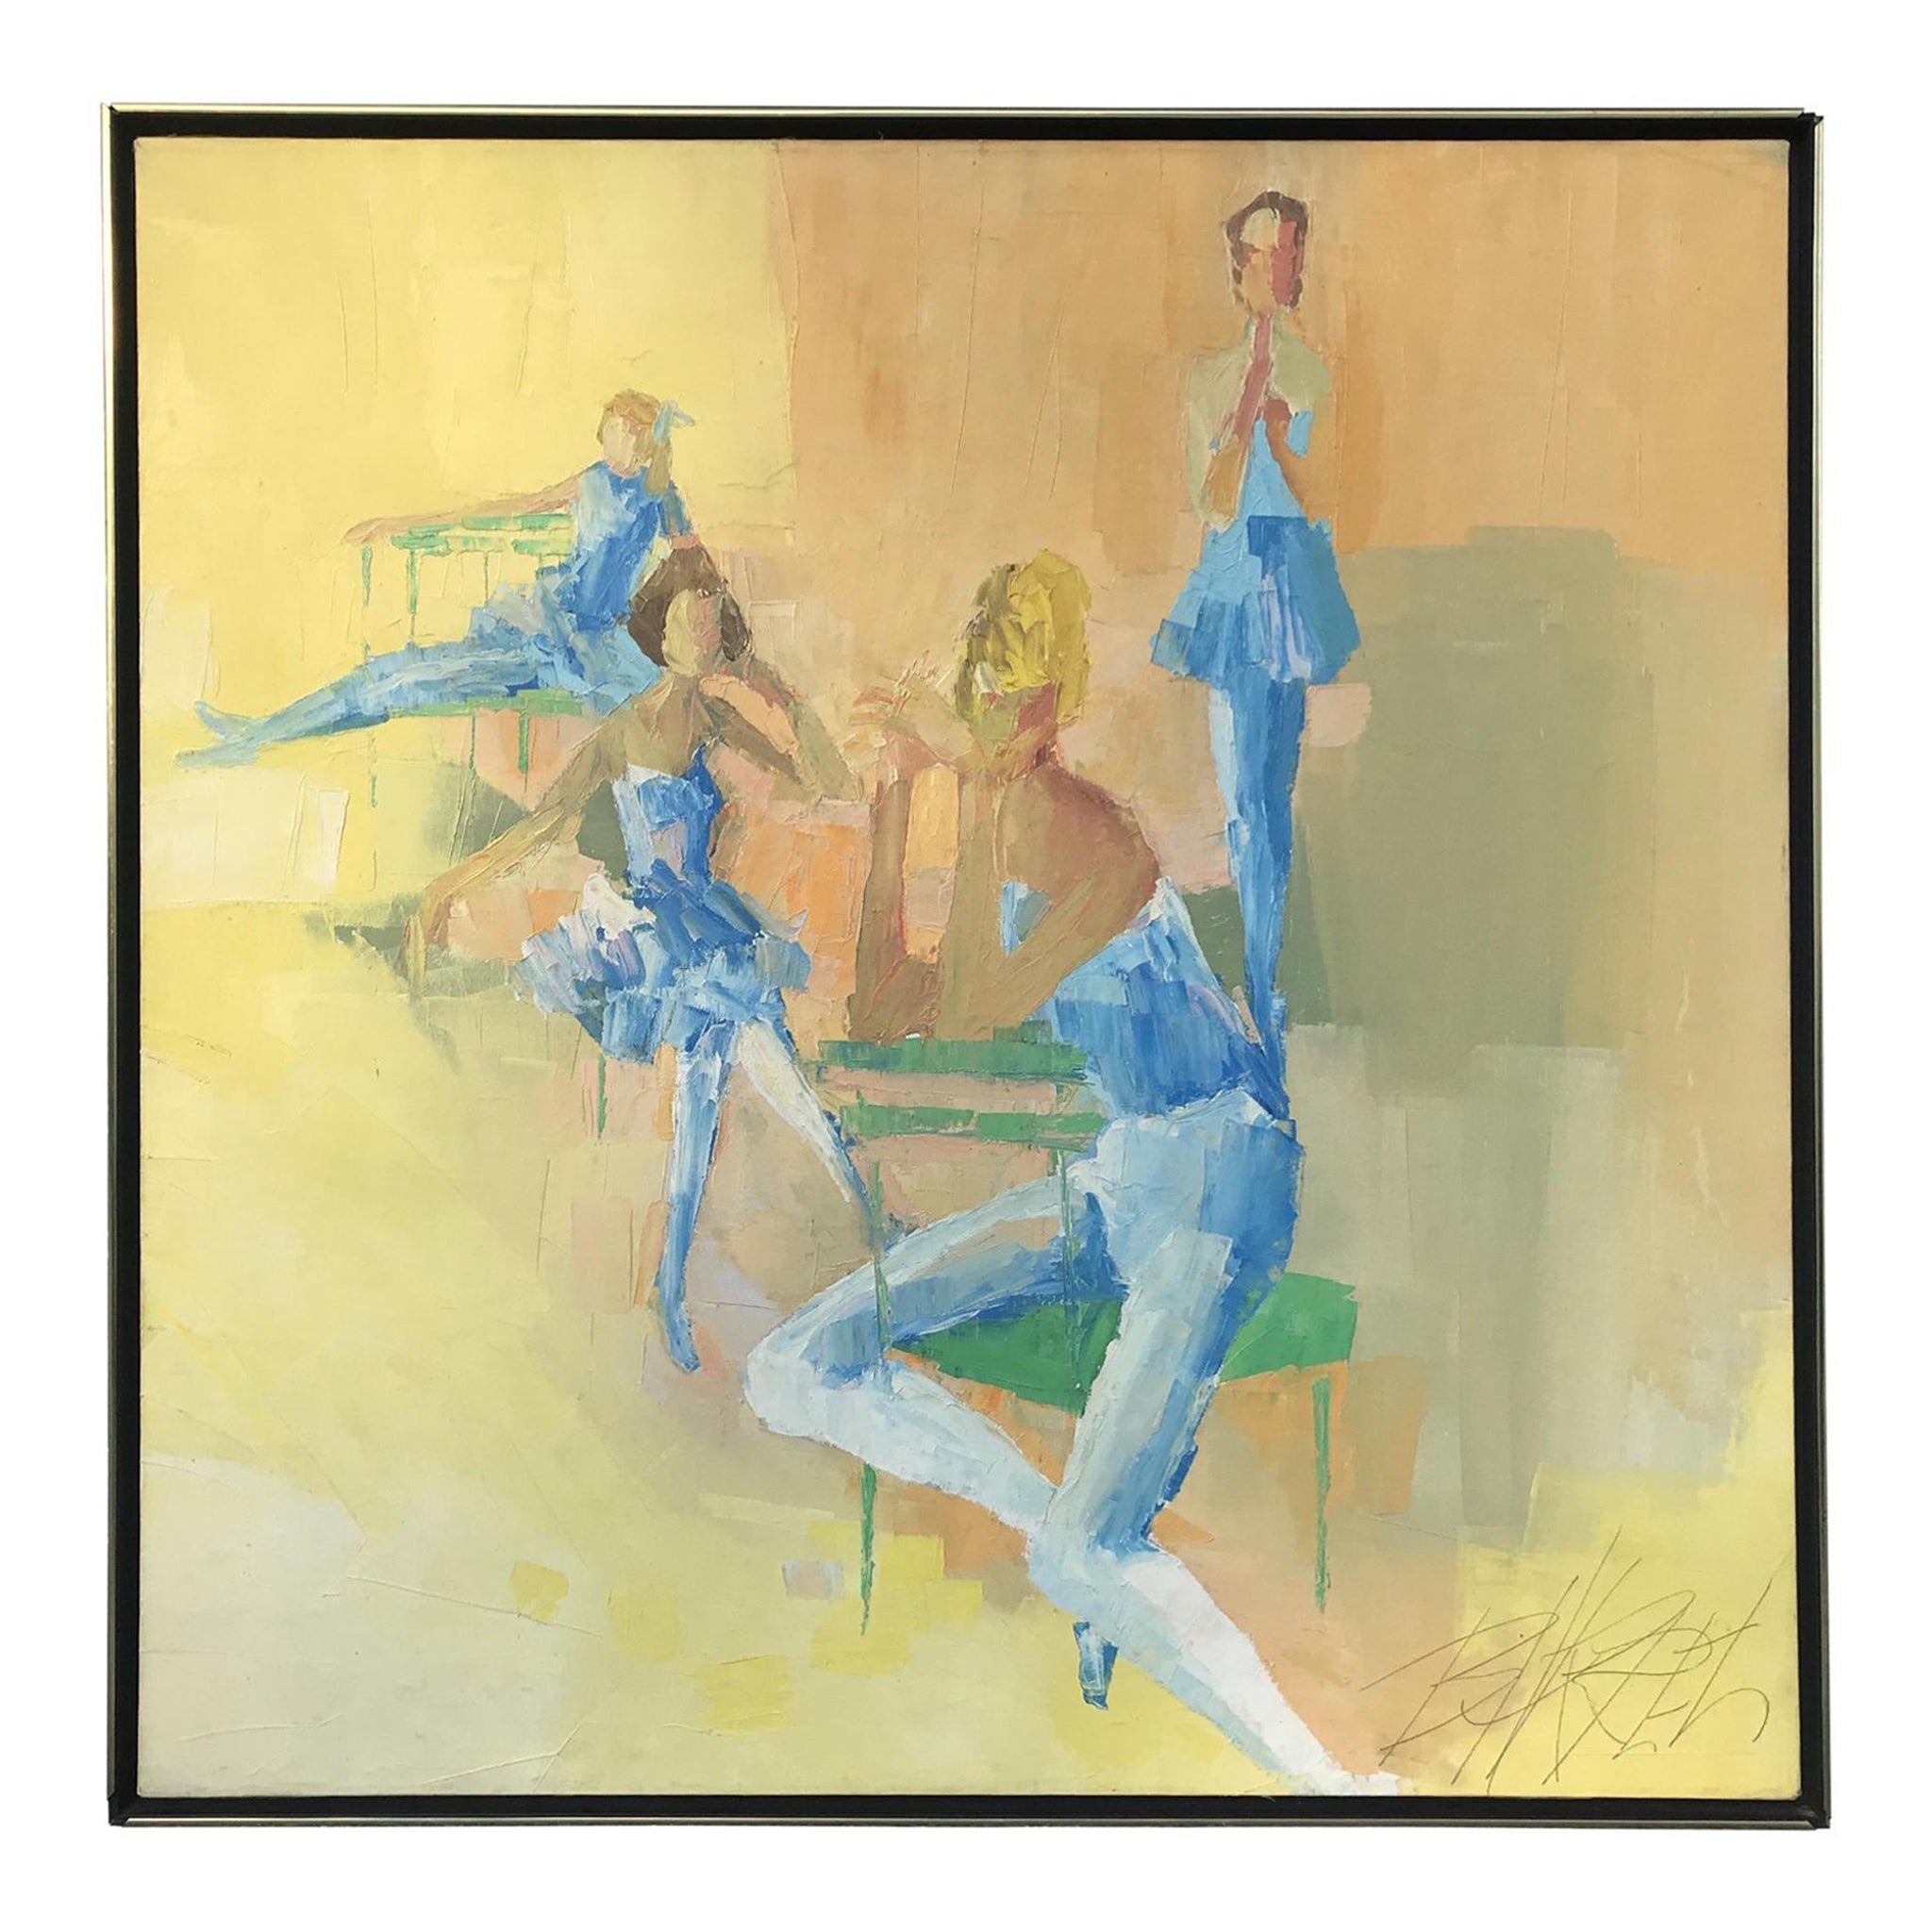 1960s Signed George Barrel Original Oil Painting on Canvas of Ballerina Posing For Sale